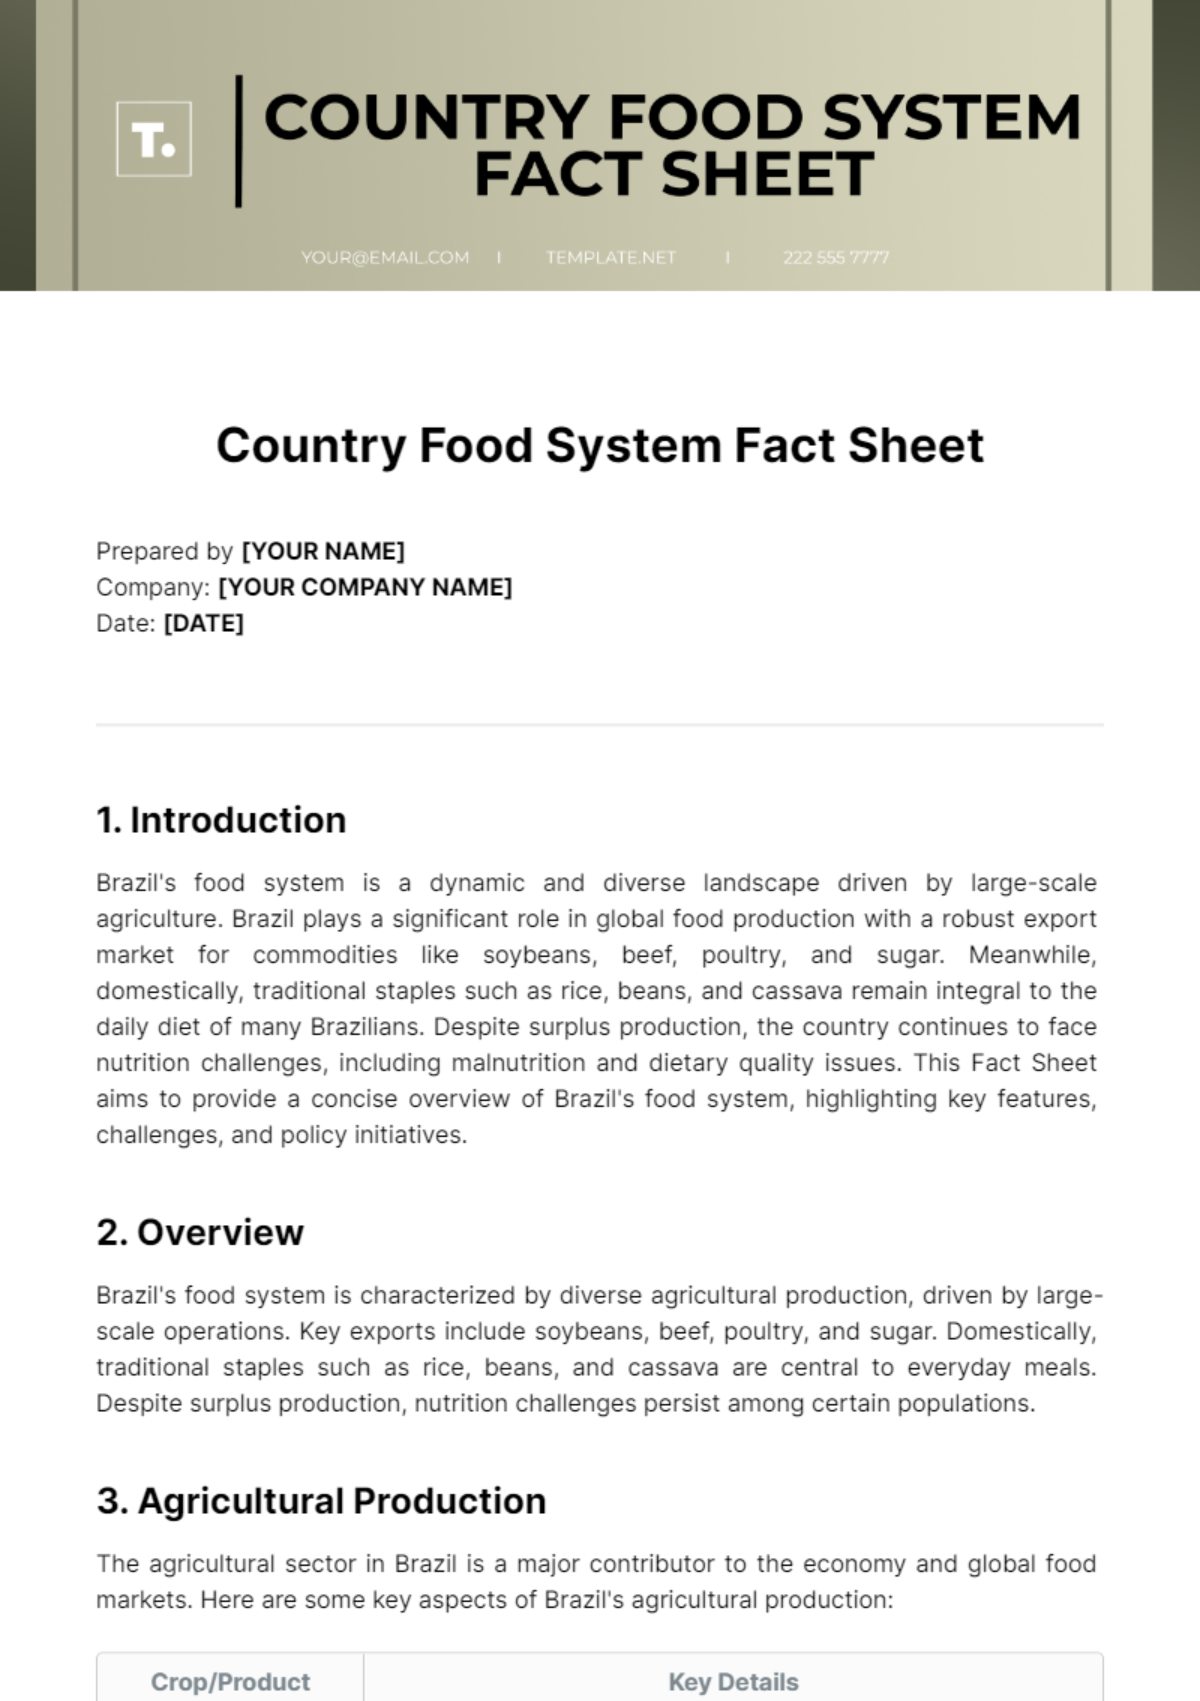 Free Country Food System Fact Sheet Template